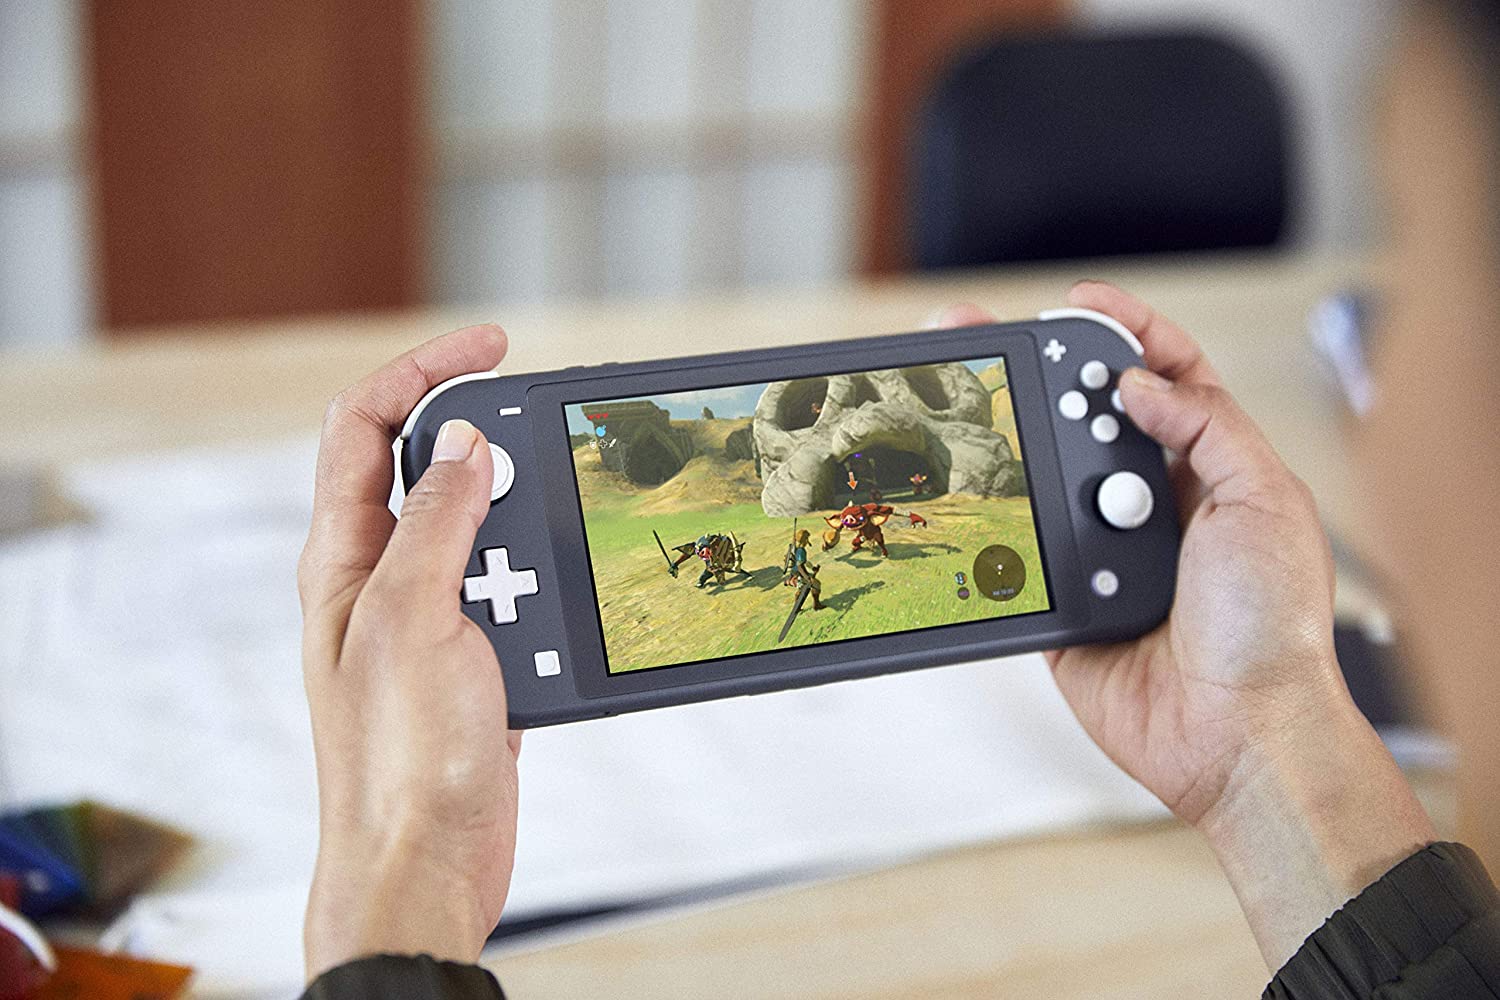 Greay Nintendo Switch Lite Being Played